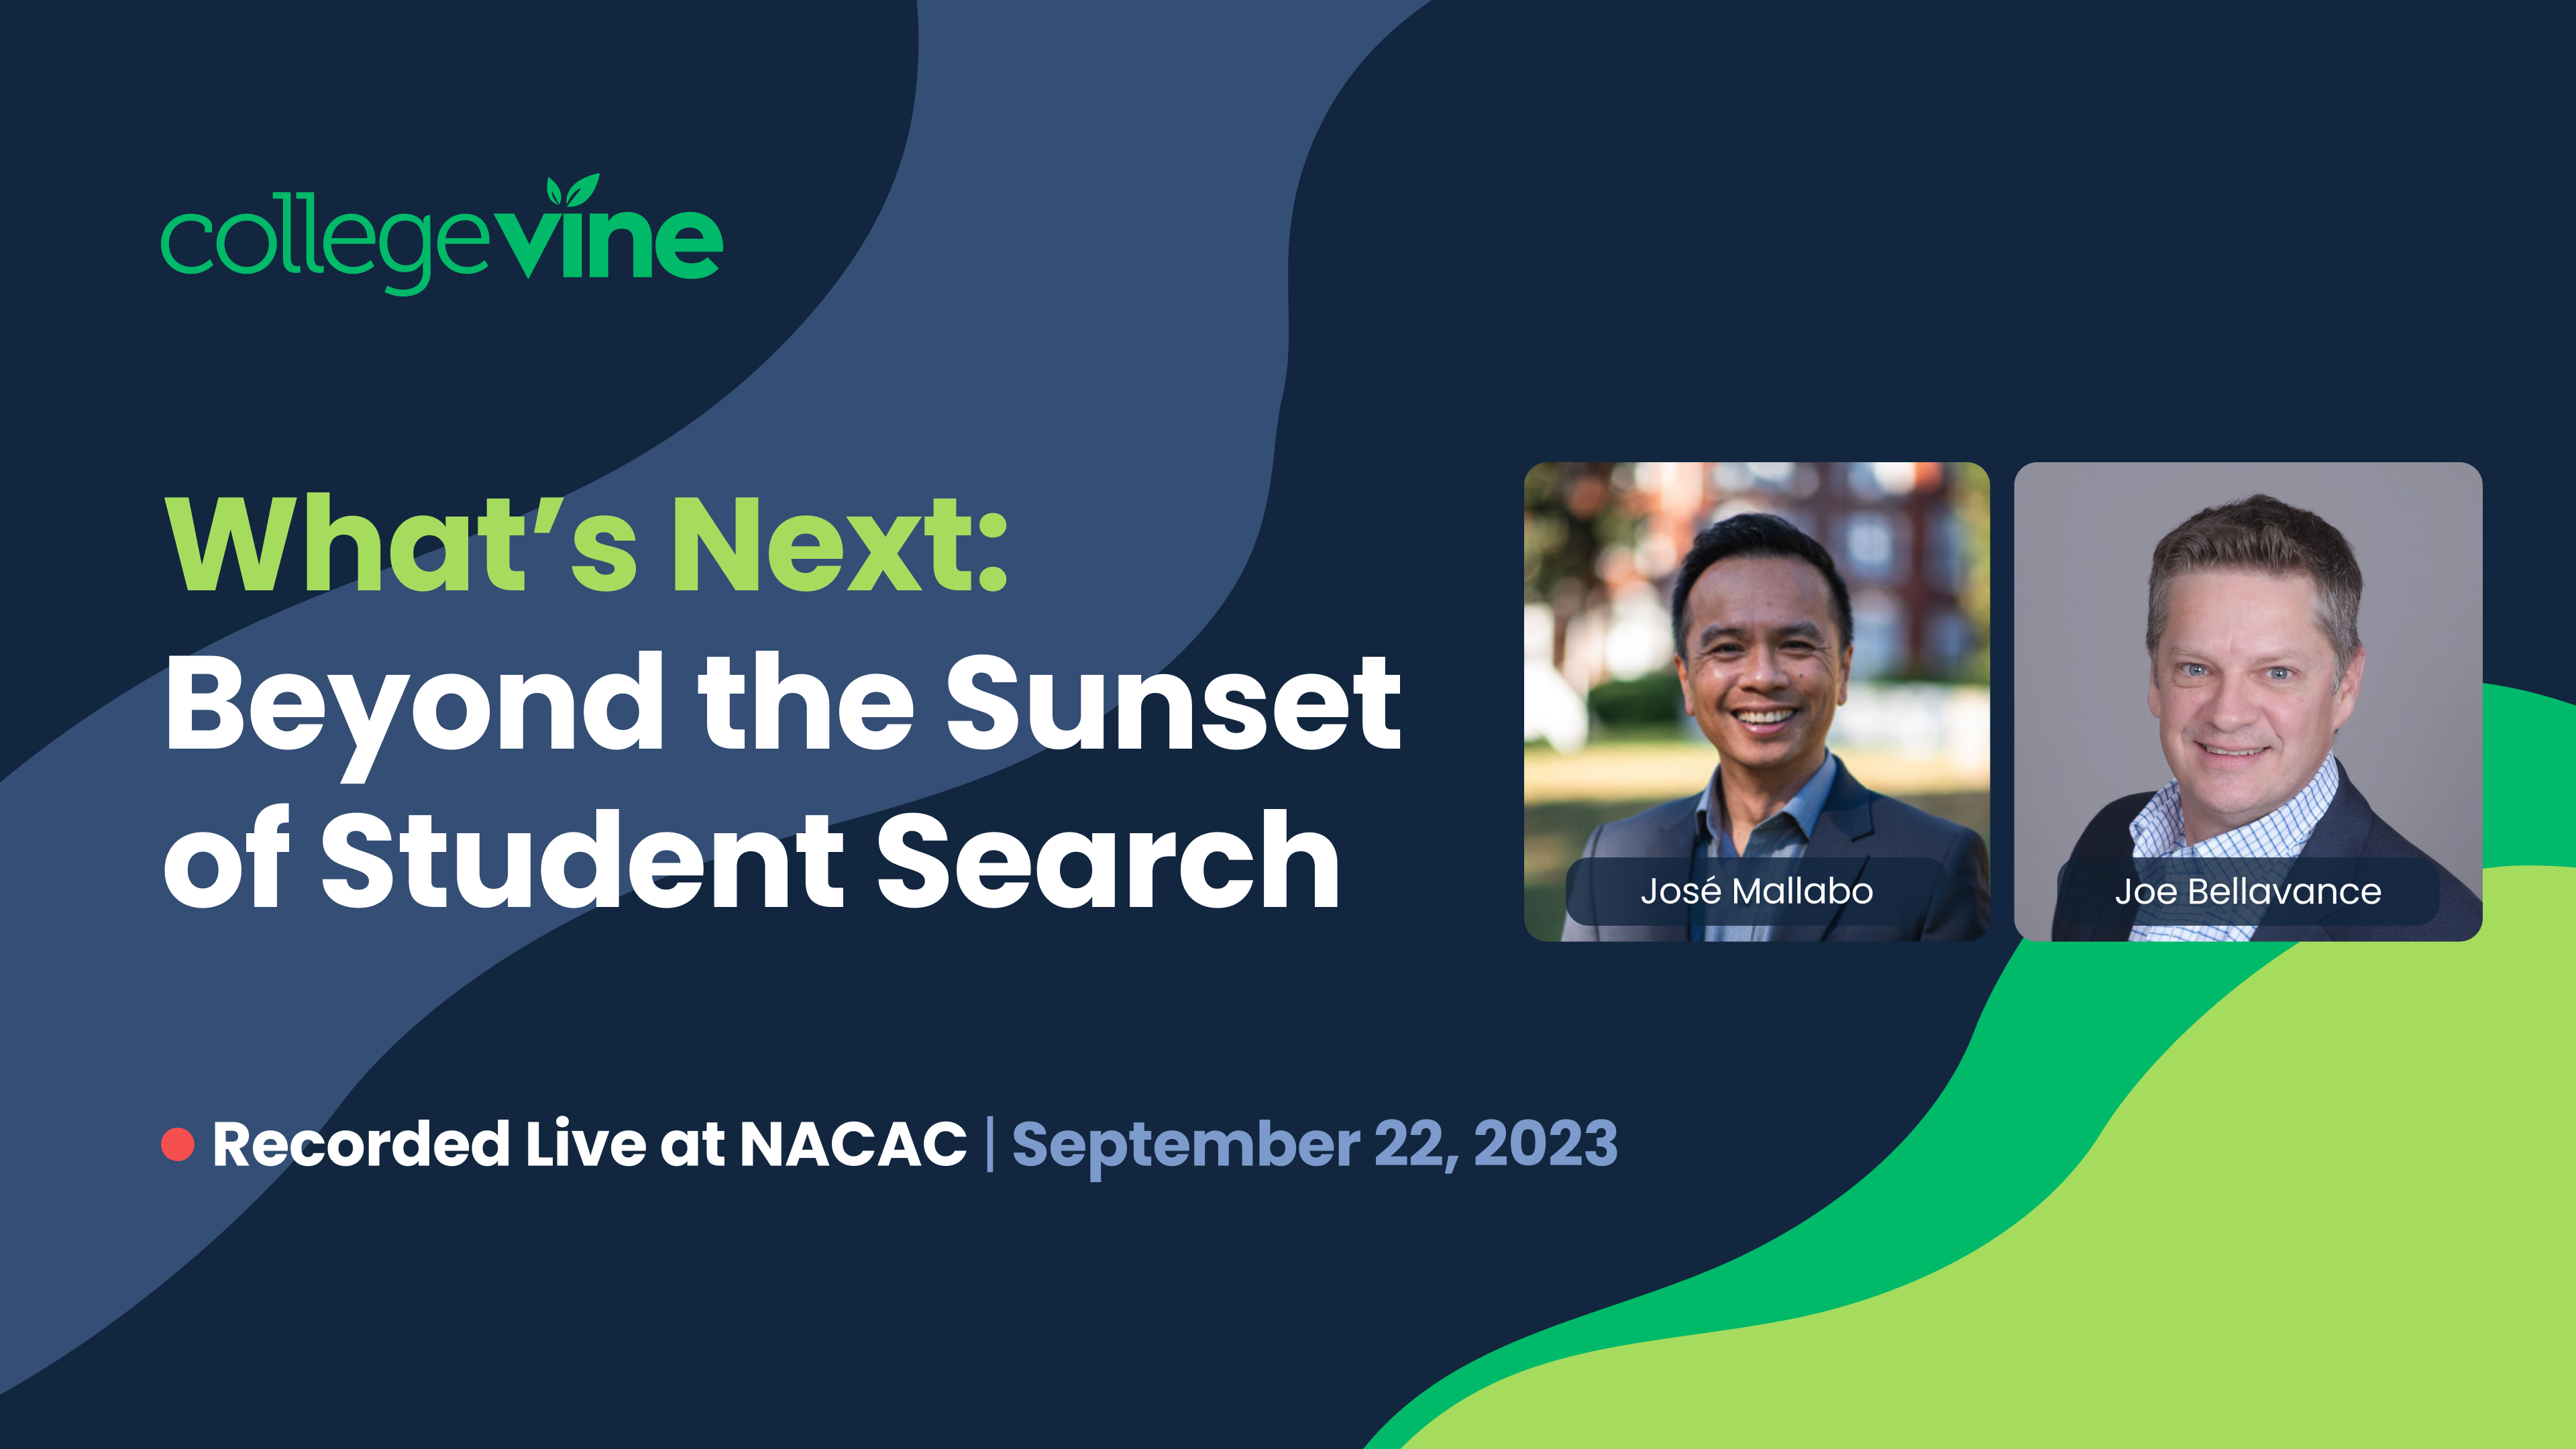 What's Next: Beyond the Sunset of Student Search